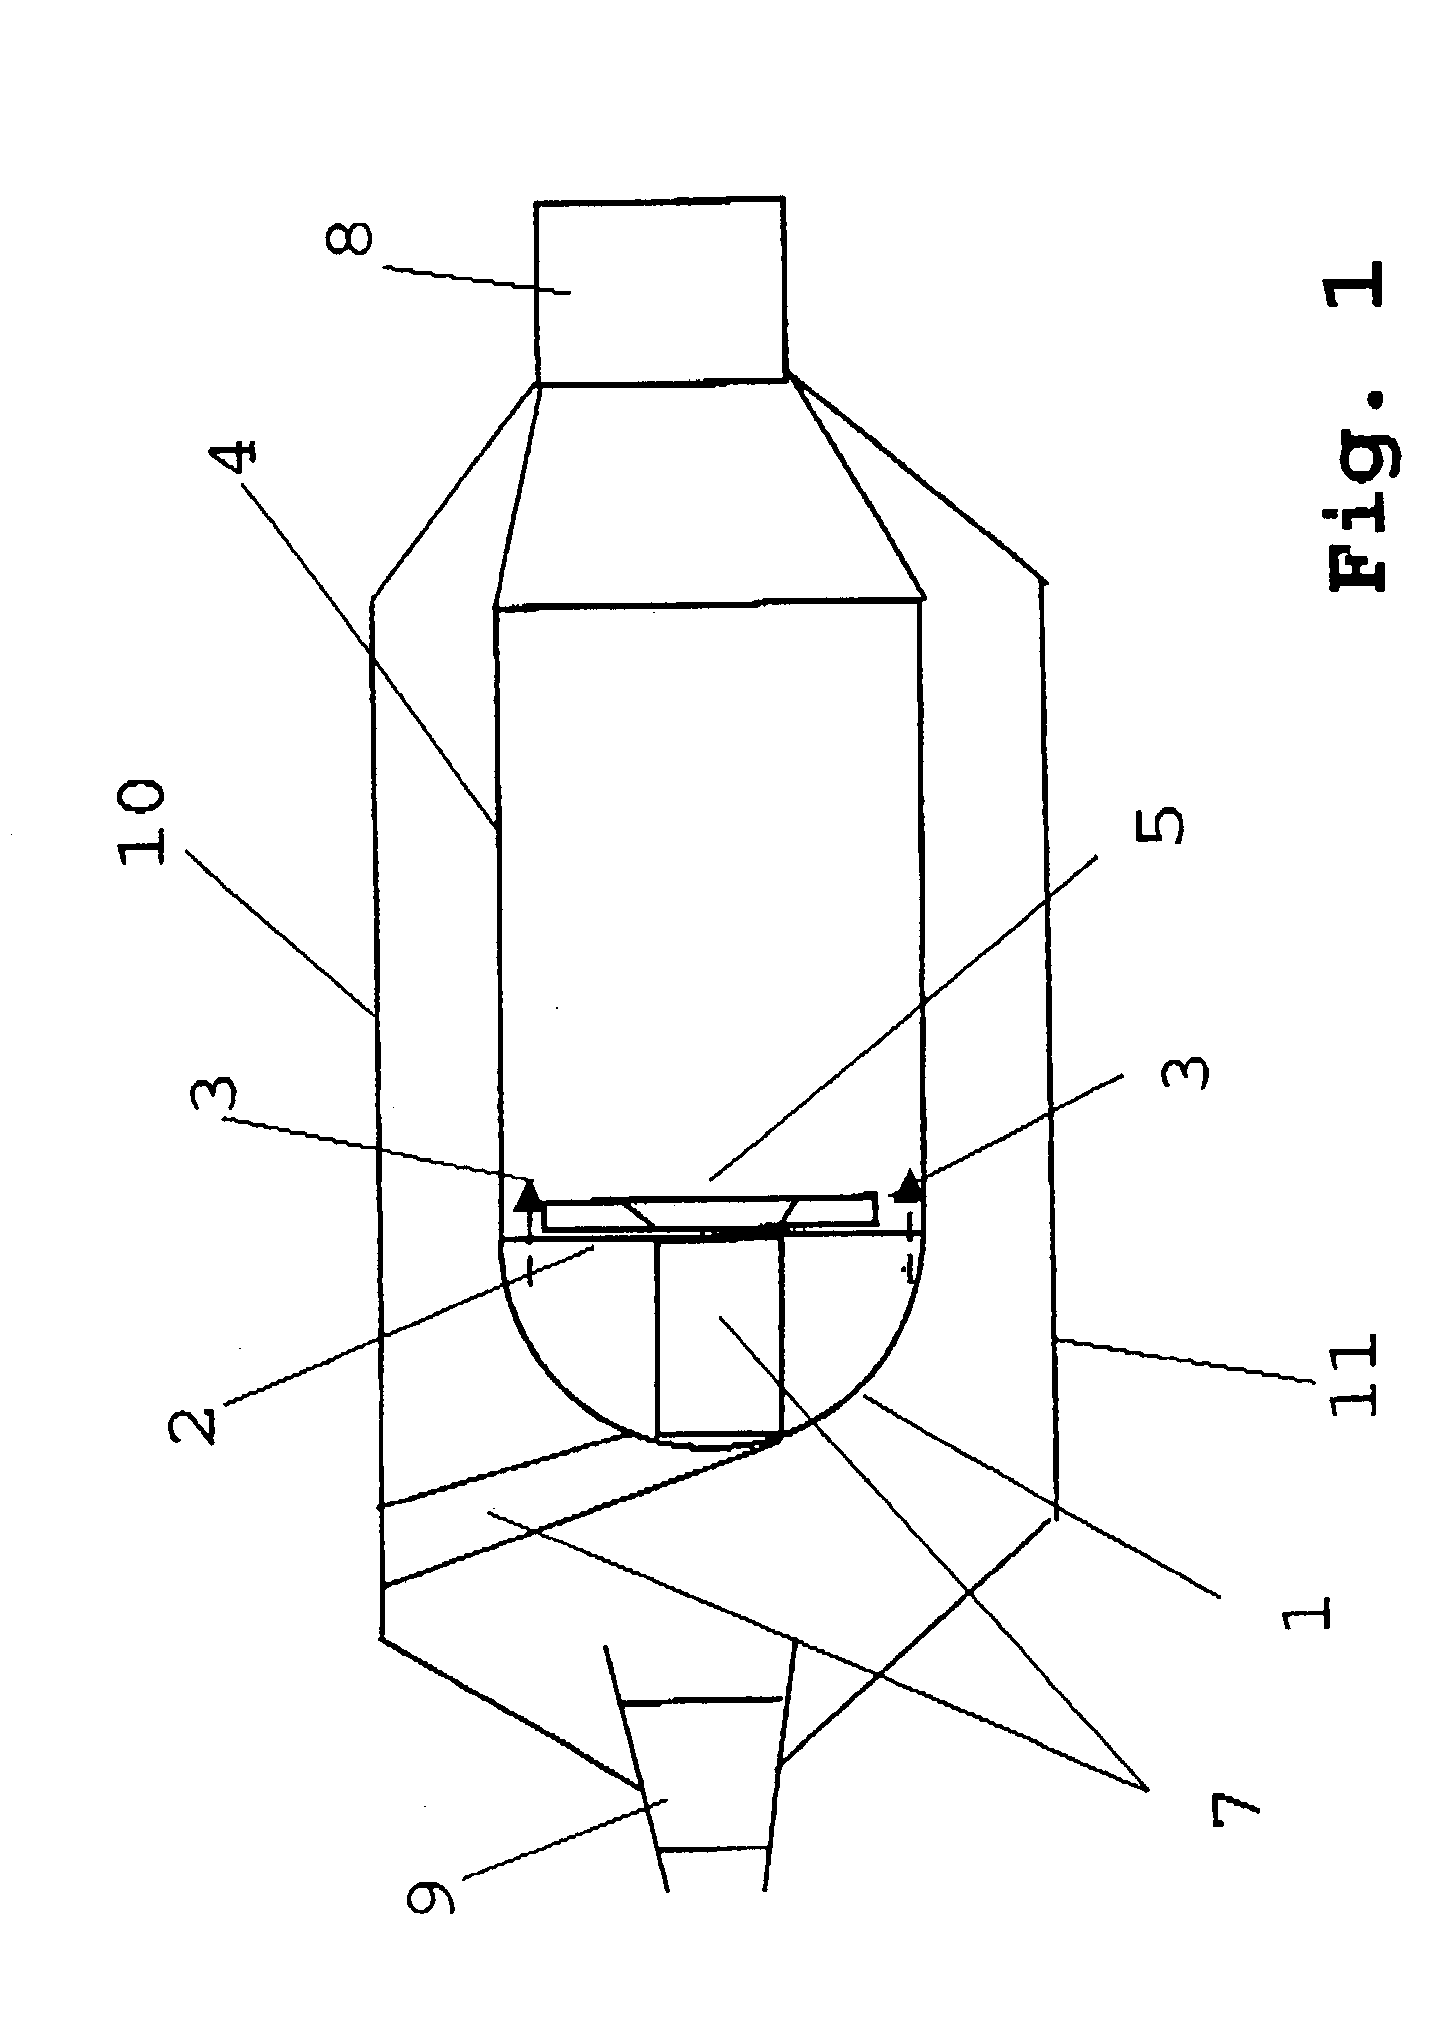 Gas turbine combustion chamber with defined fuel input for the improvement of the homogeneity of the fuel-air mixture